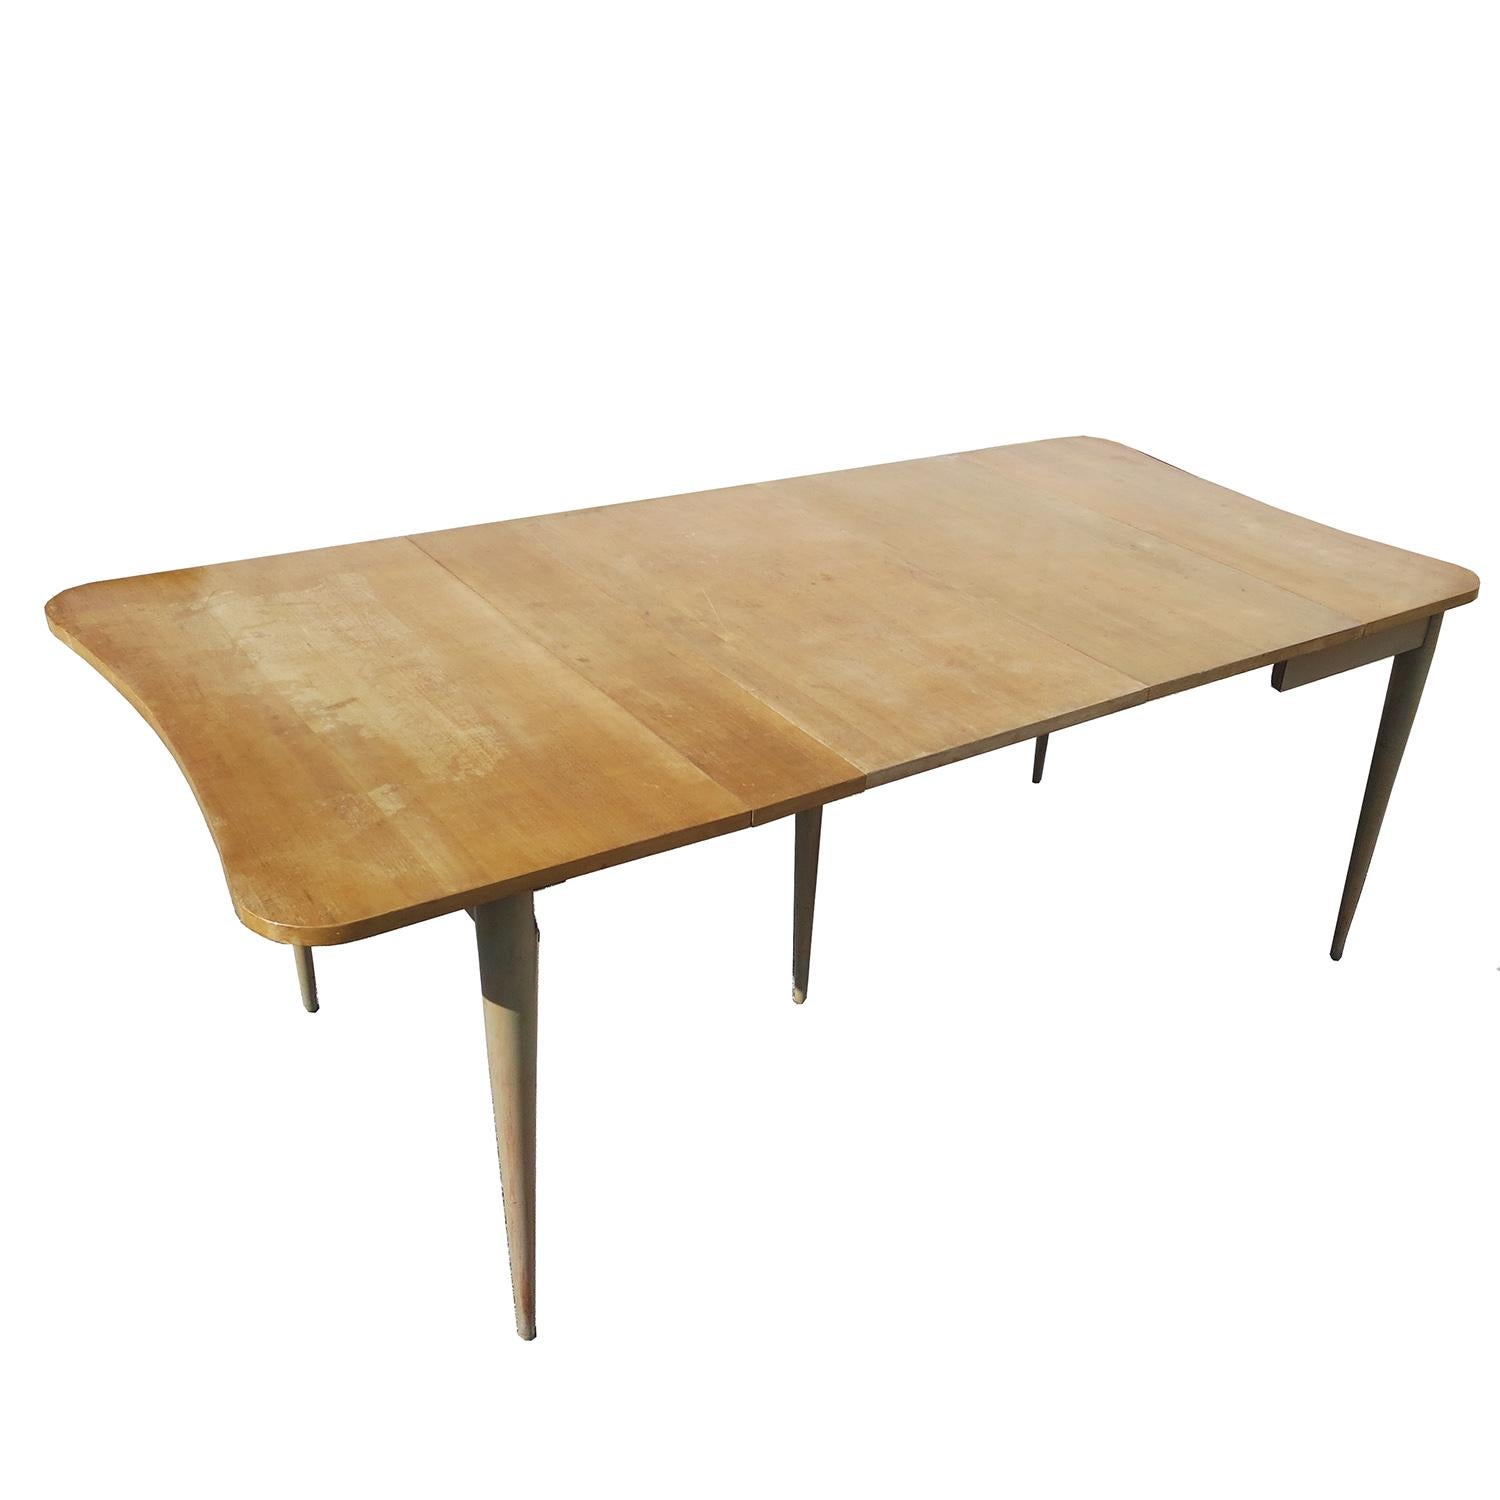 Introduced in the Herman Miller catalog of 1940, the #4166 table was part of Rohde's 